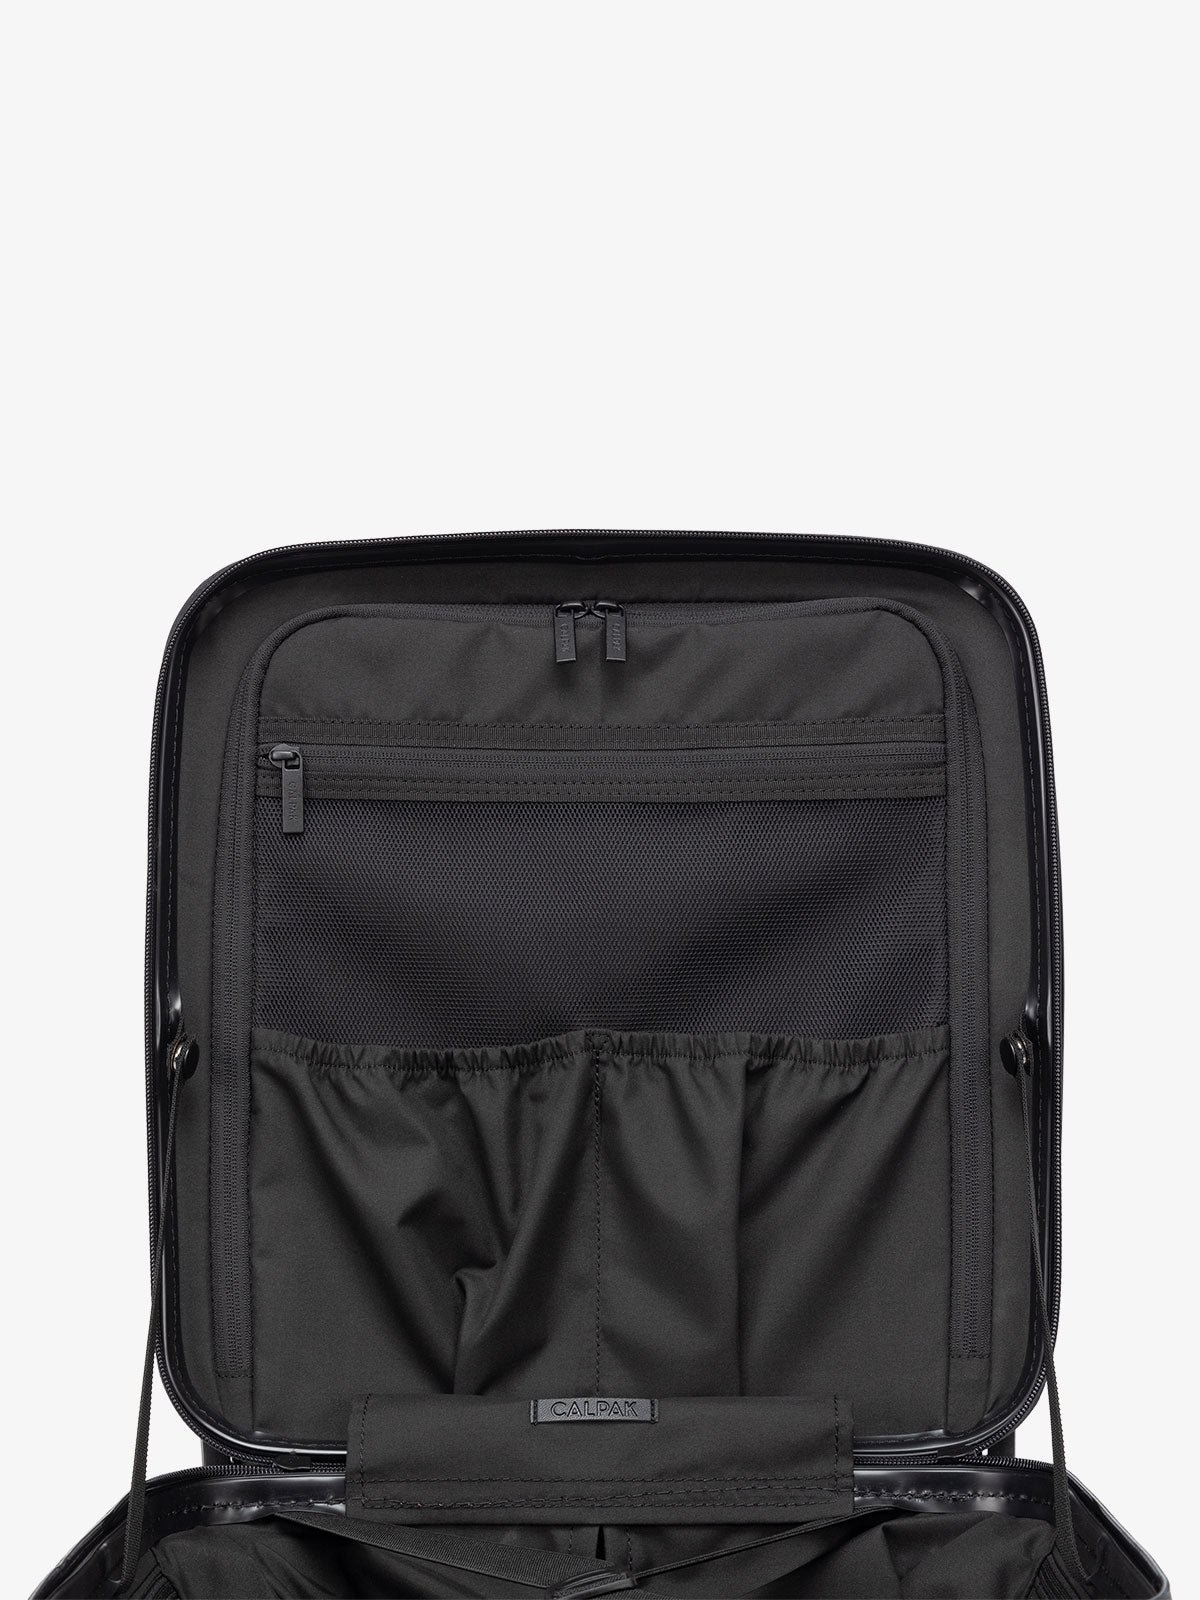 Hue mini carry on suitcase with zippered divider and multiple pockets